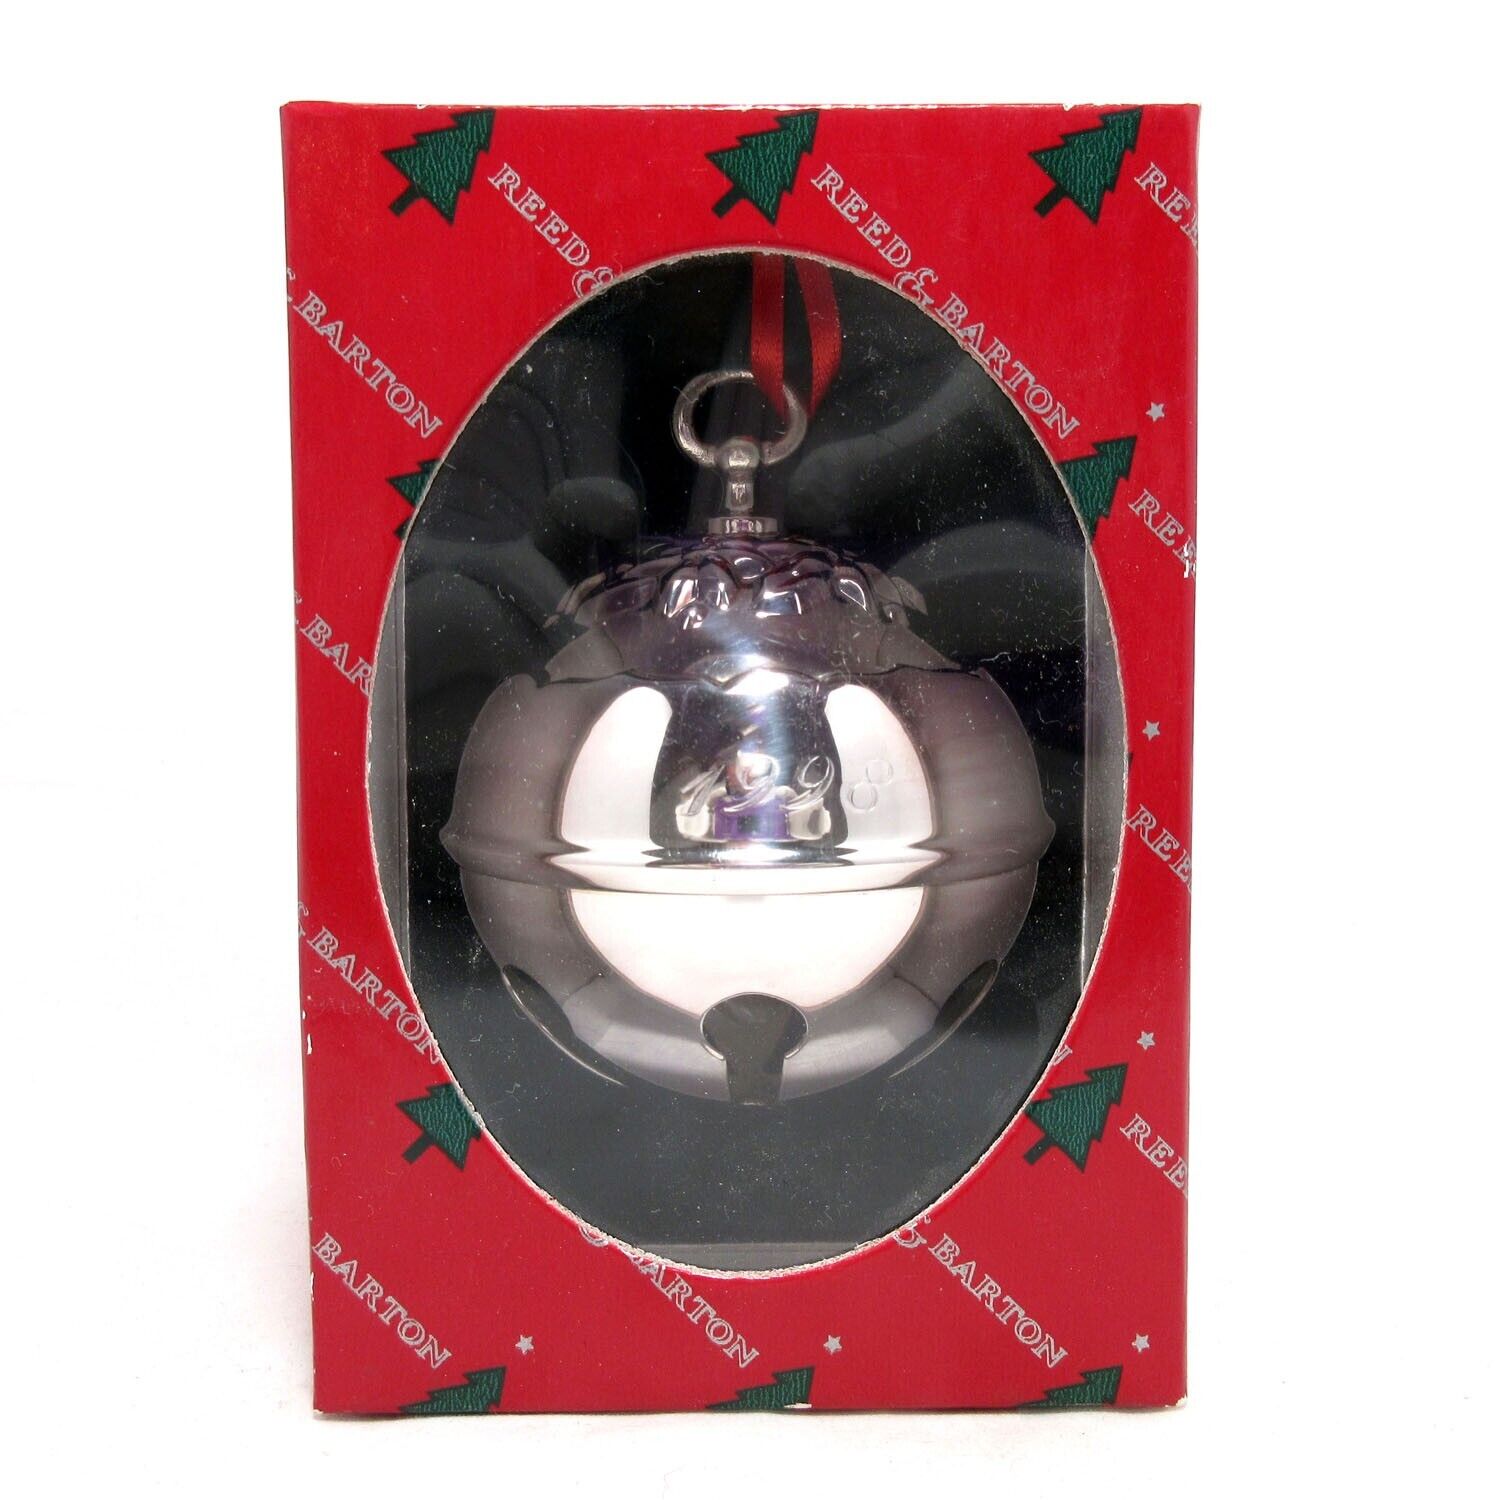 The 1998 Holly Bell by Reed & Barton Silver Plated Christmas Ornament